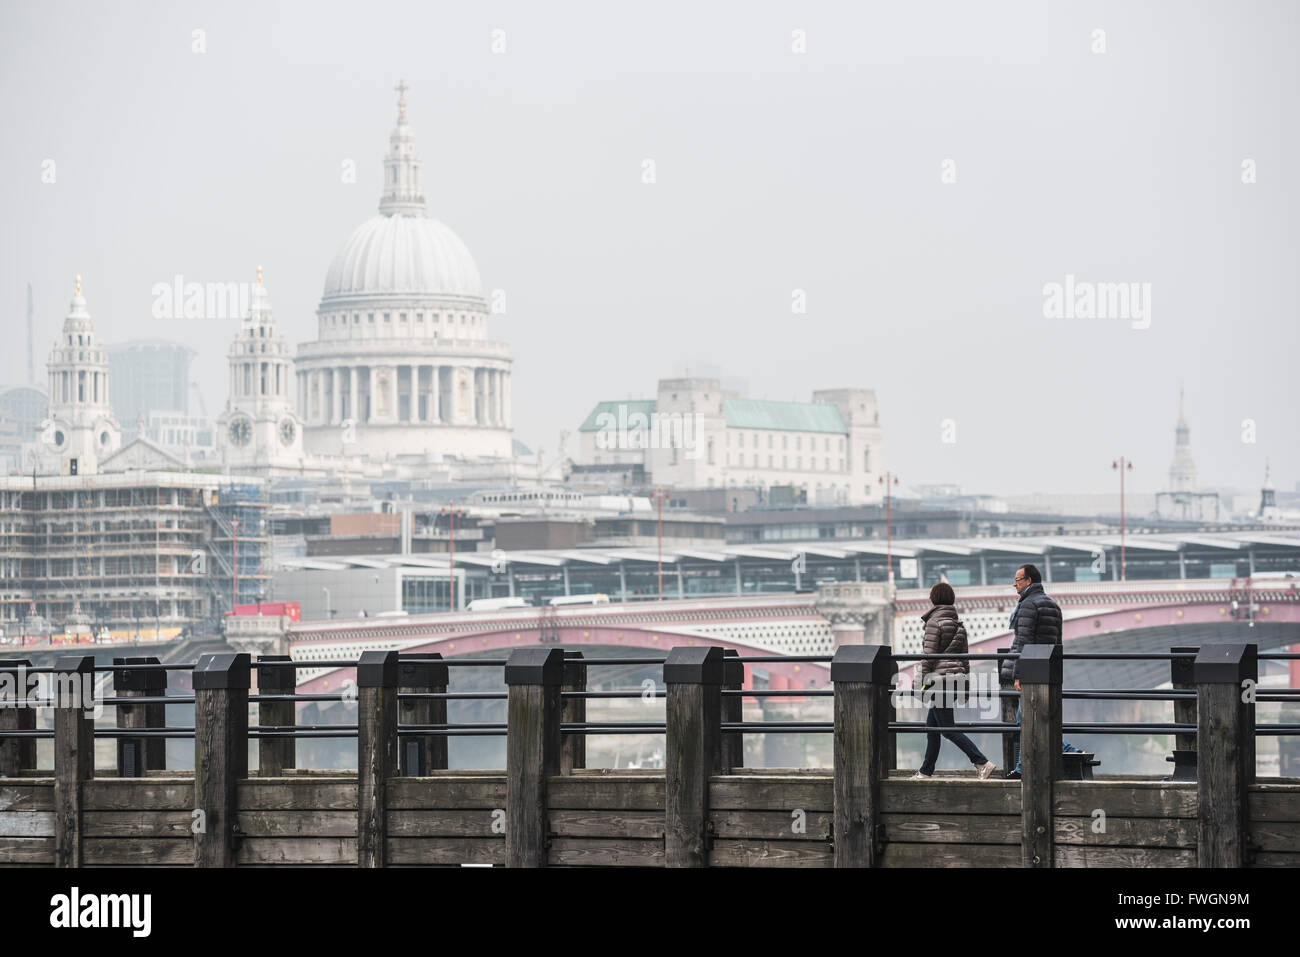 Couple on a pier overlooking St. Paul's Cathedral on the banks of the River Thames, South Bank, London, England, United Kingdom Stock Photo